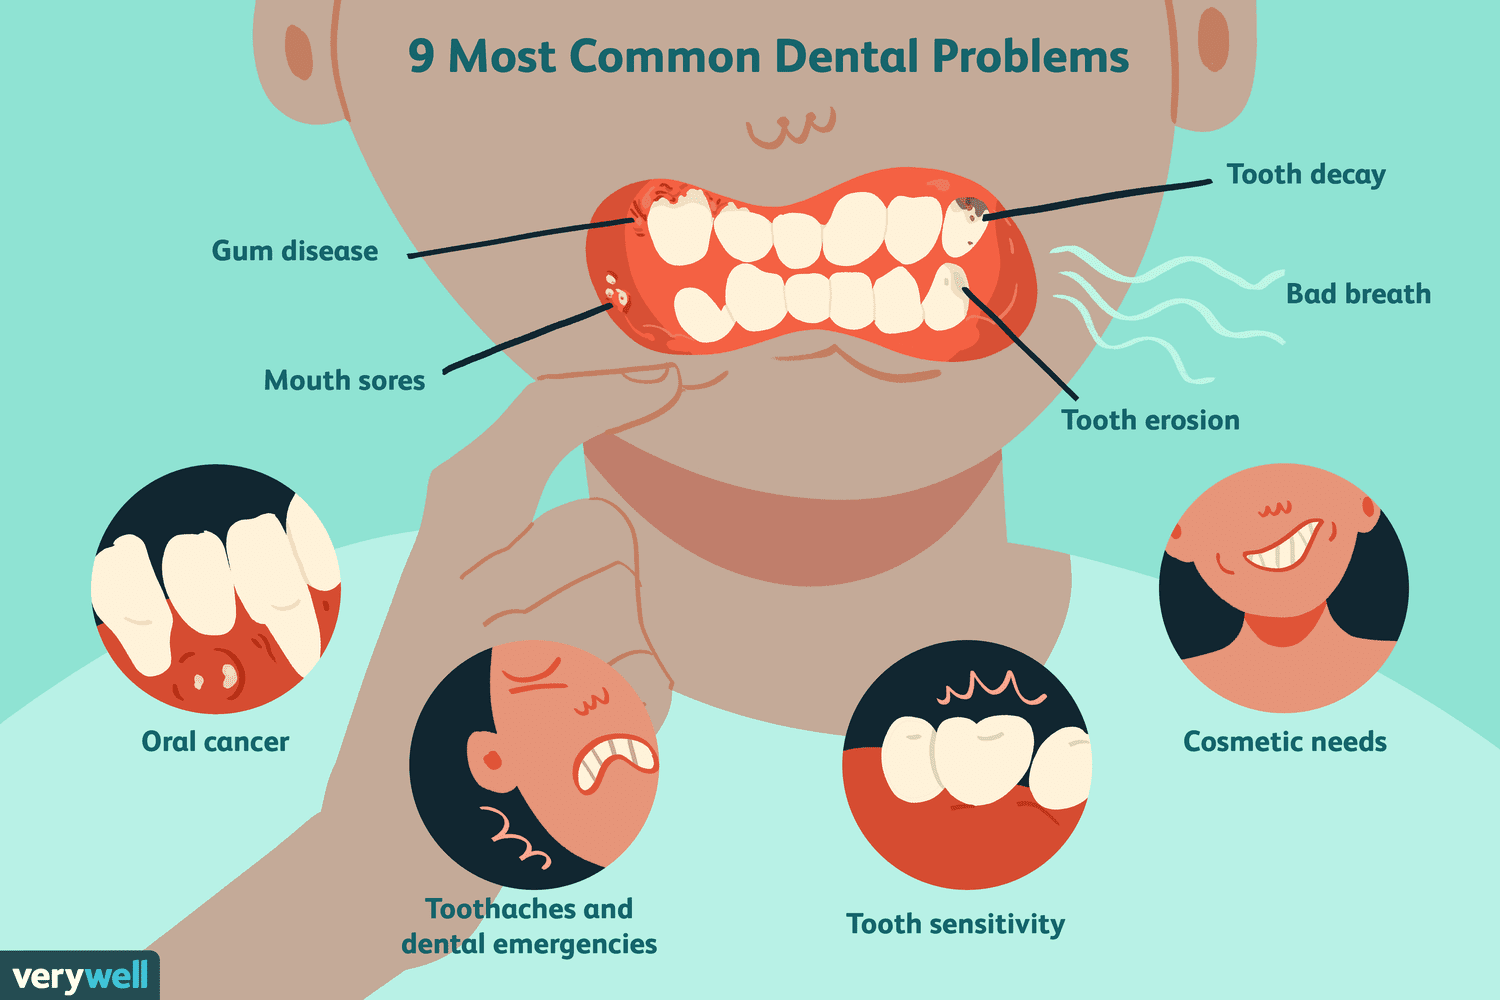 5 Common Dental Problems and Treatment